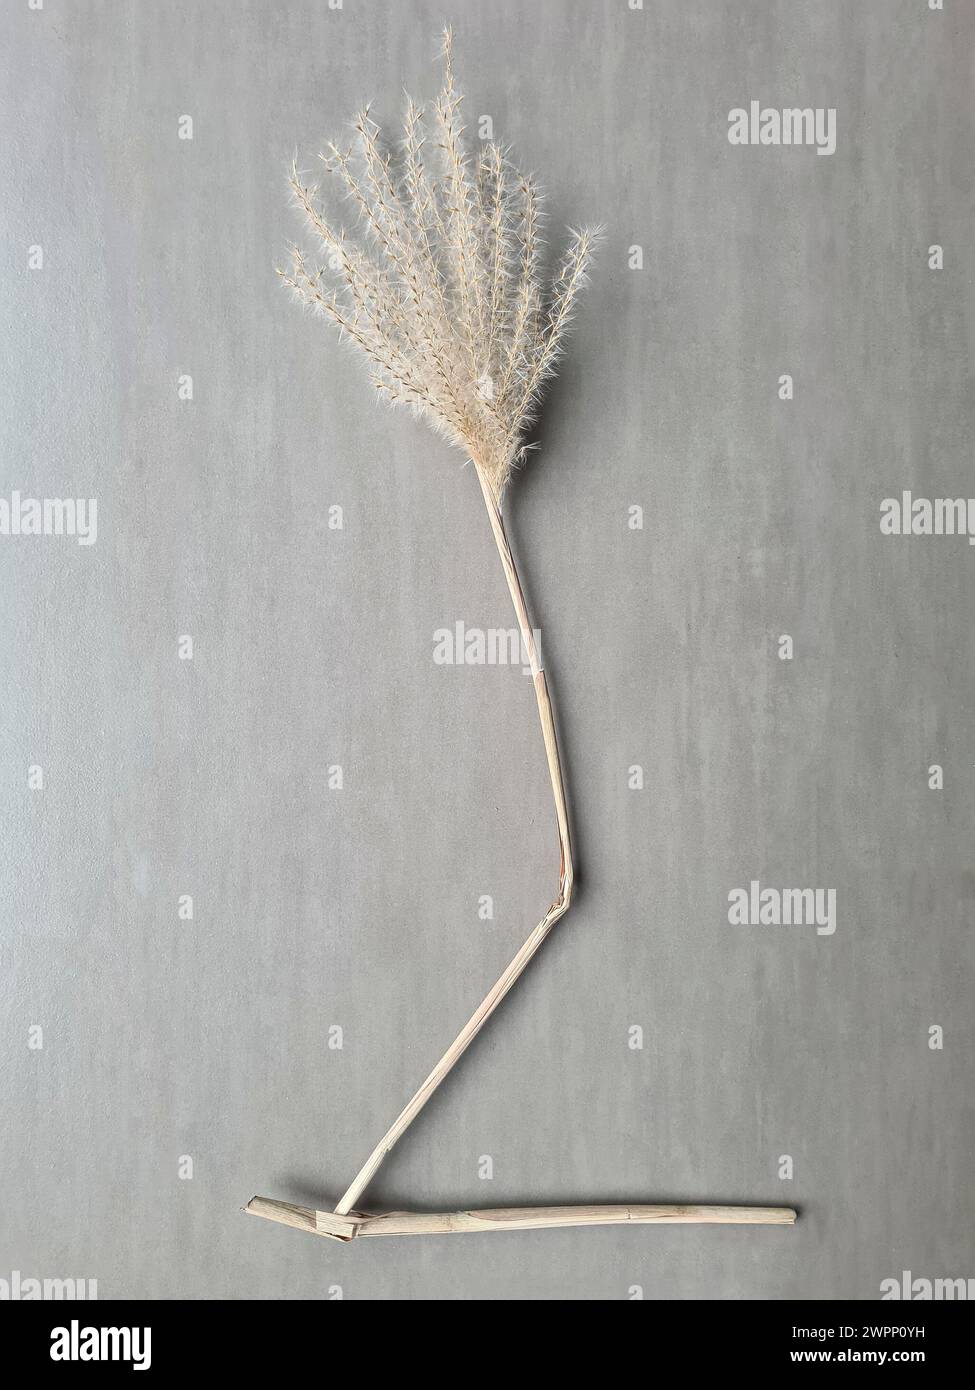 Dried pampas grass with bent stem against a light gray background Stock Photo